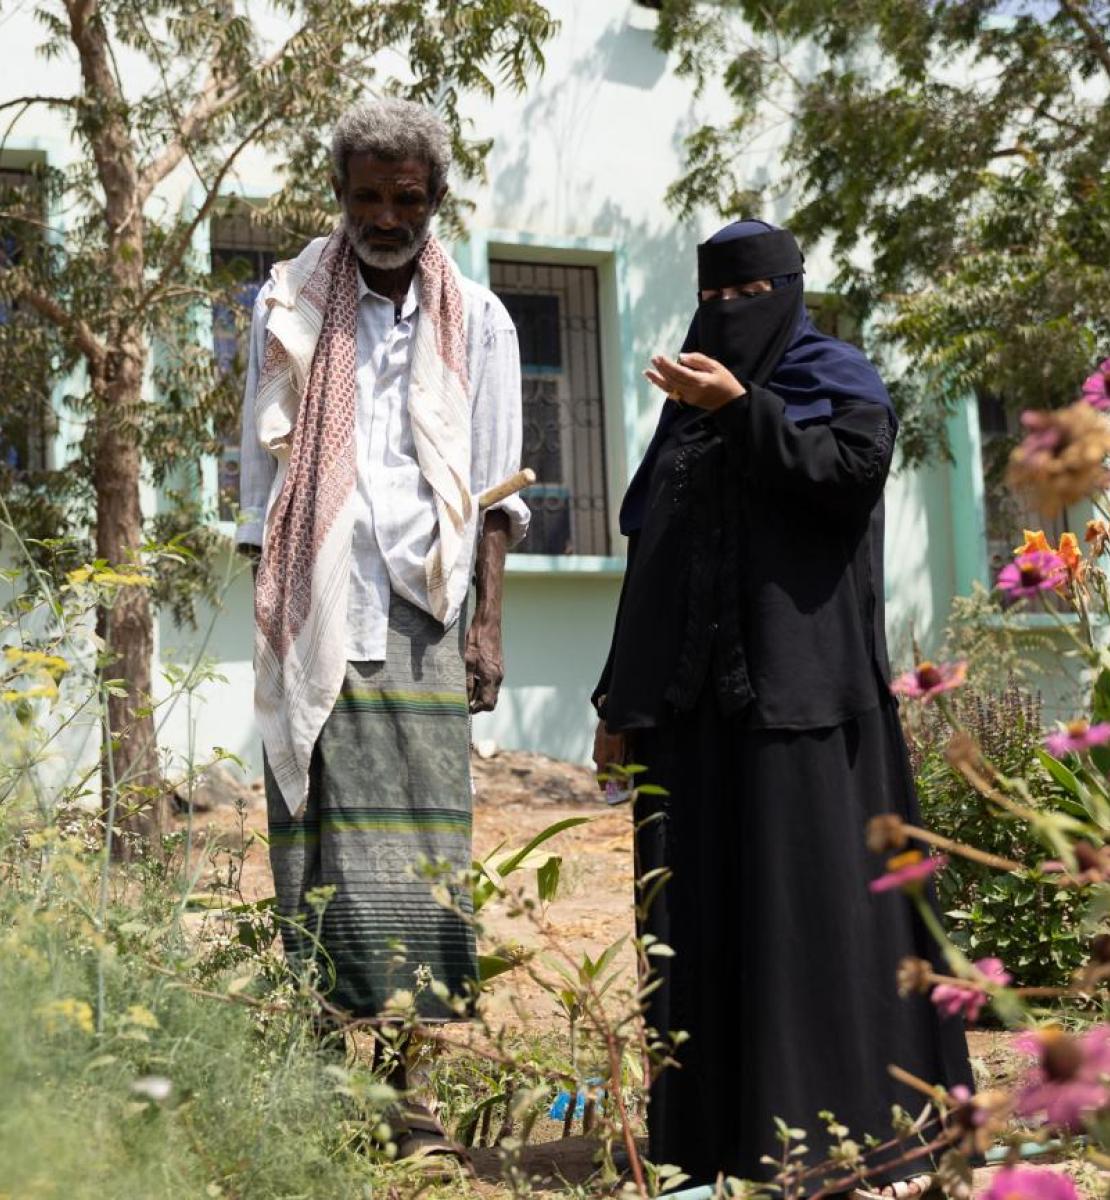 A man and a woman wearing a veil in a small garden.